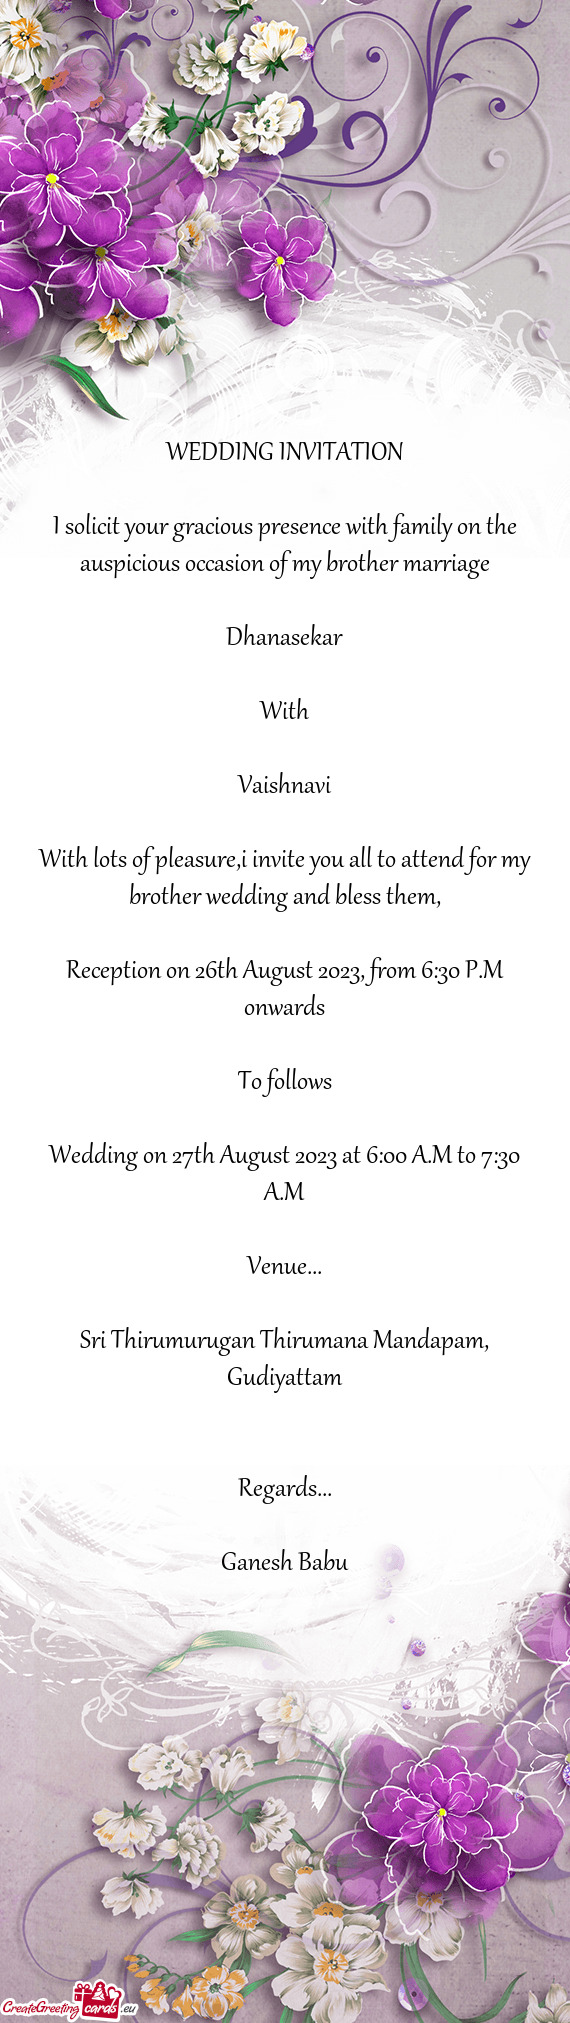 Reception on 26th August 2023, from 6:30 P.M onwards